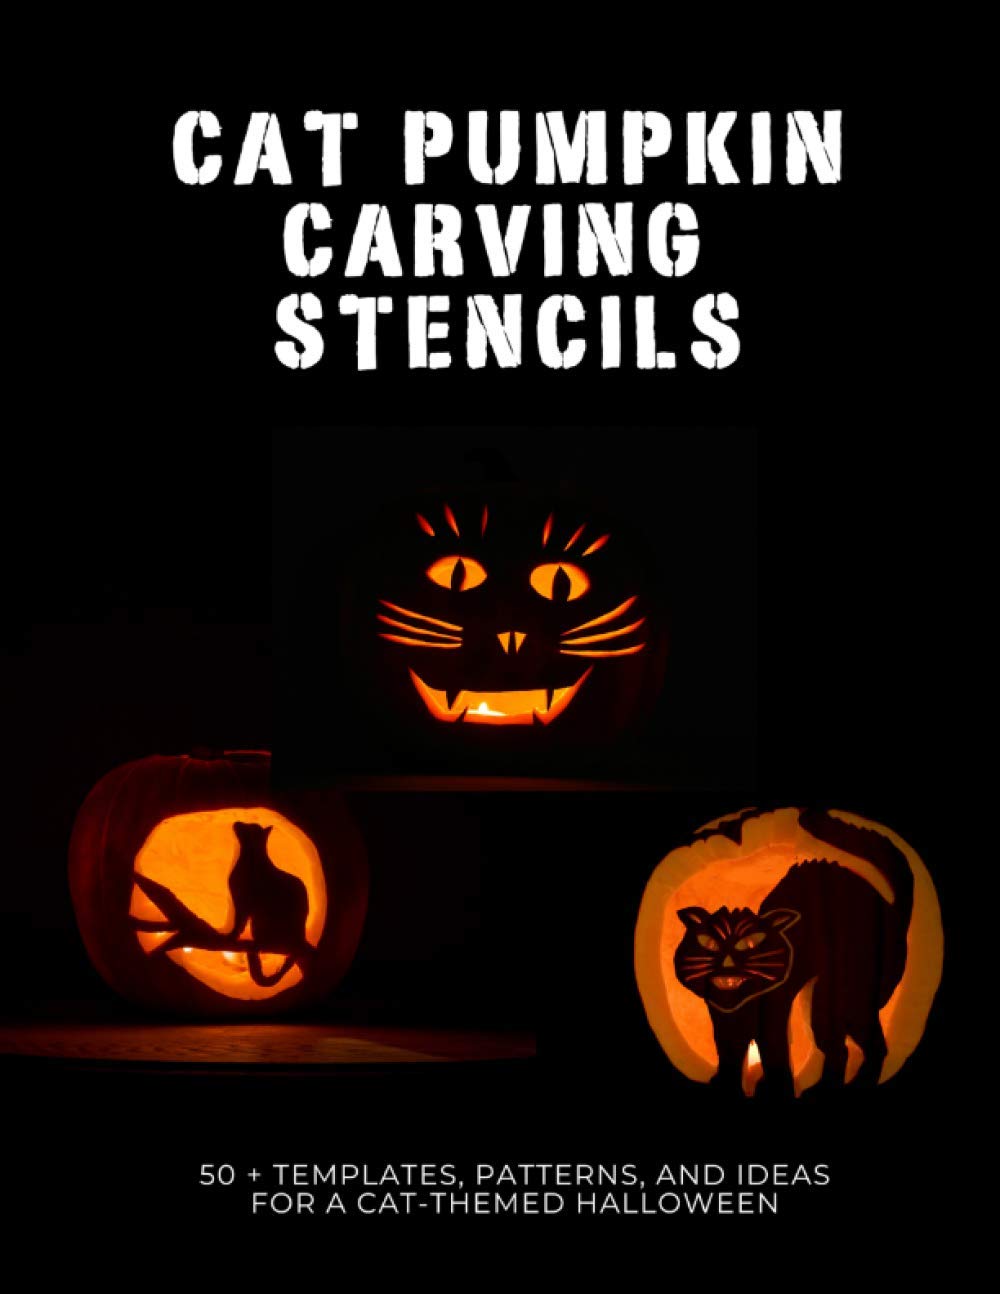 Cat Pumpkin Carving Stencils: 50+ Templates, Patterns, and Ideas for a Cat-Themed Halloween